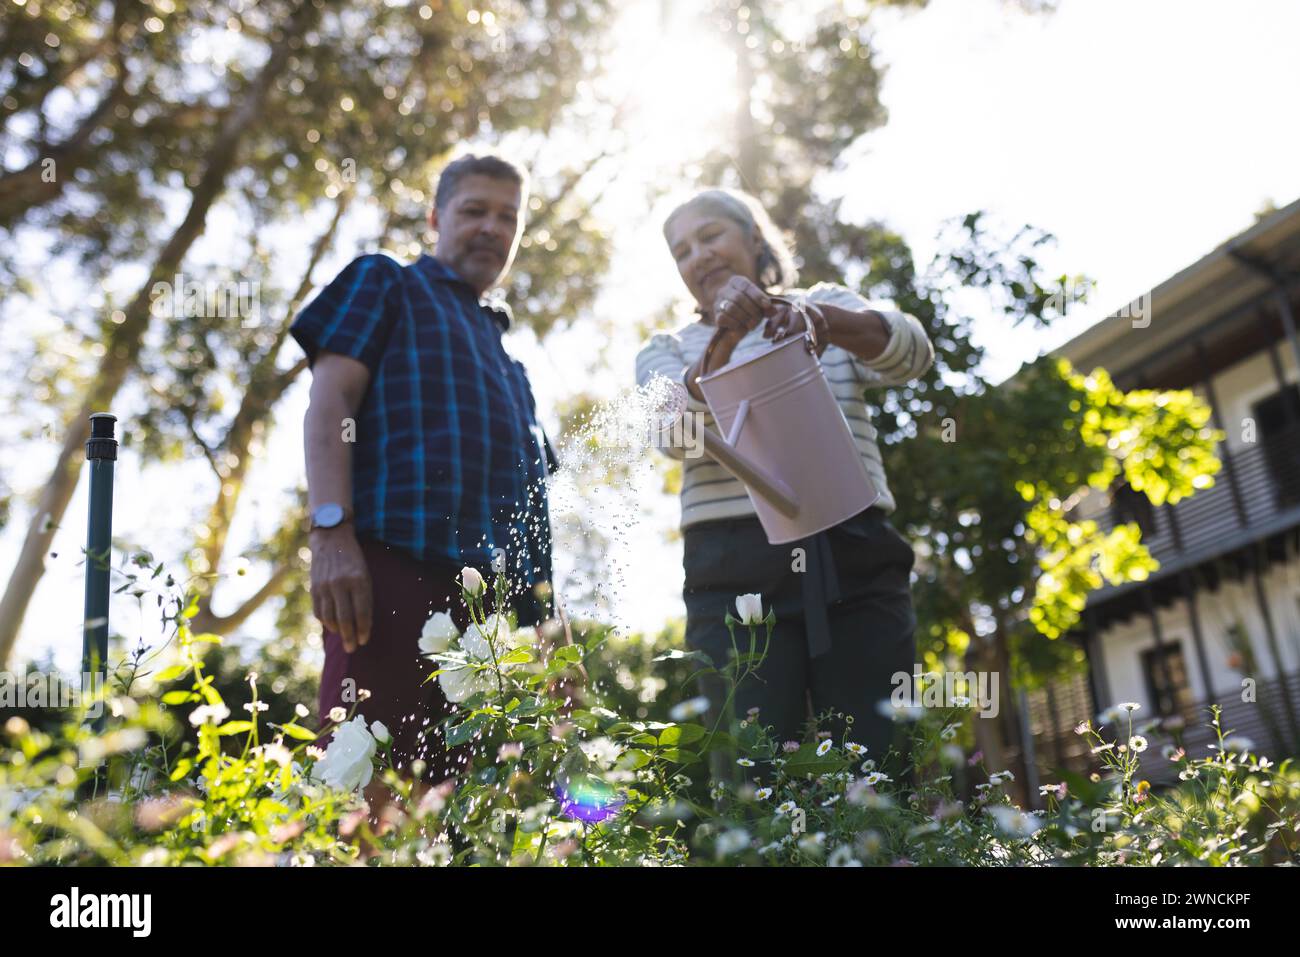 Senior biracial woman and man are tending to garden flowers Stock Photo